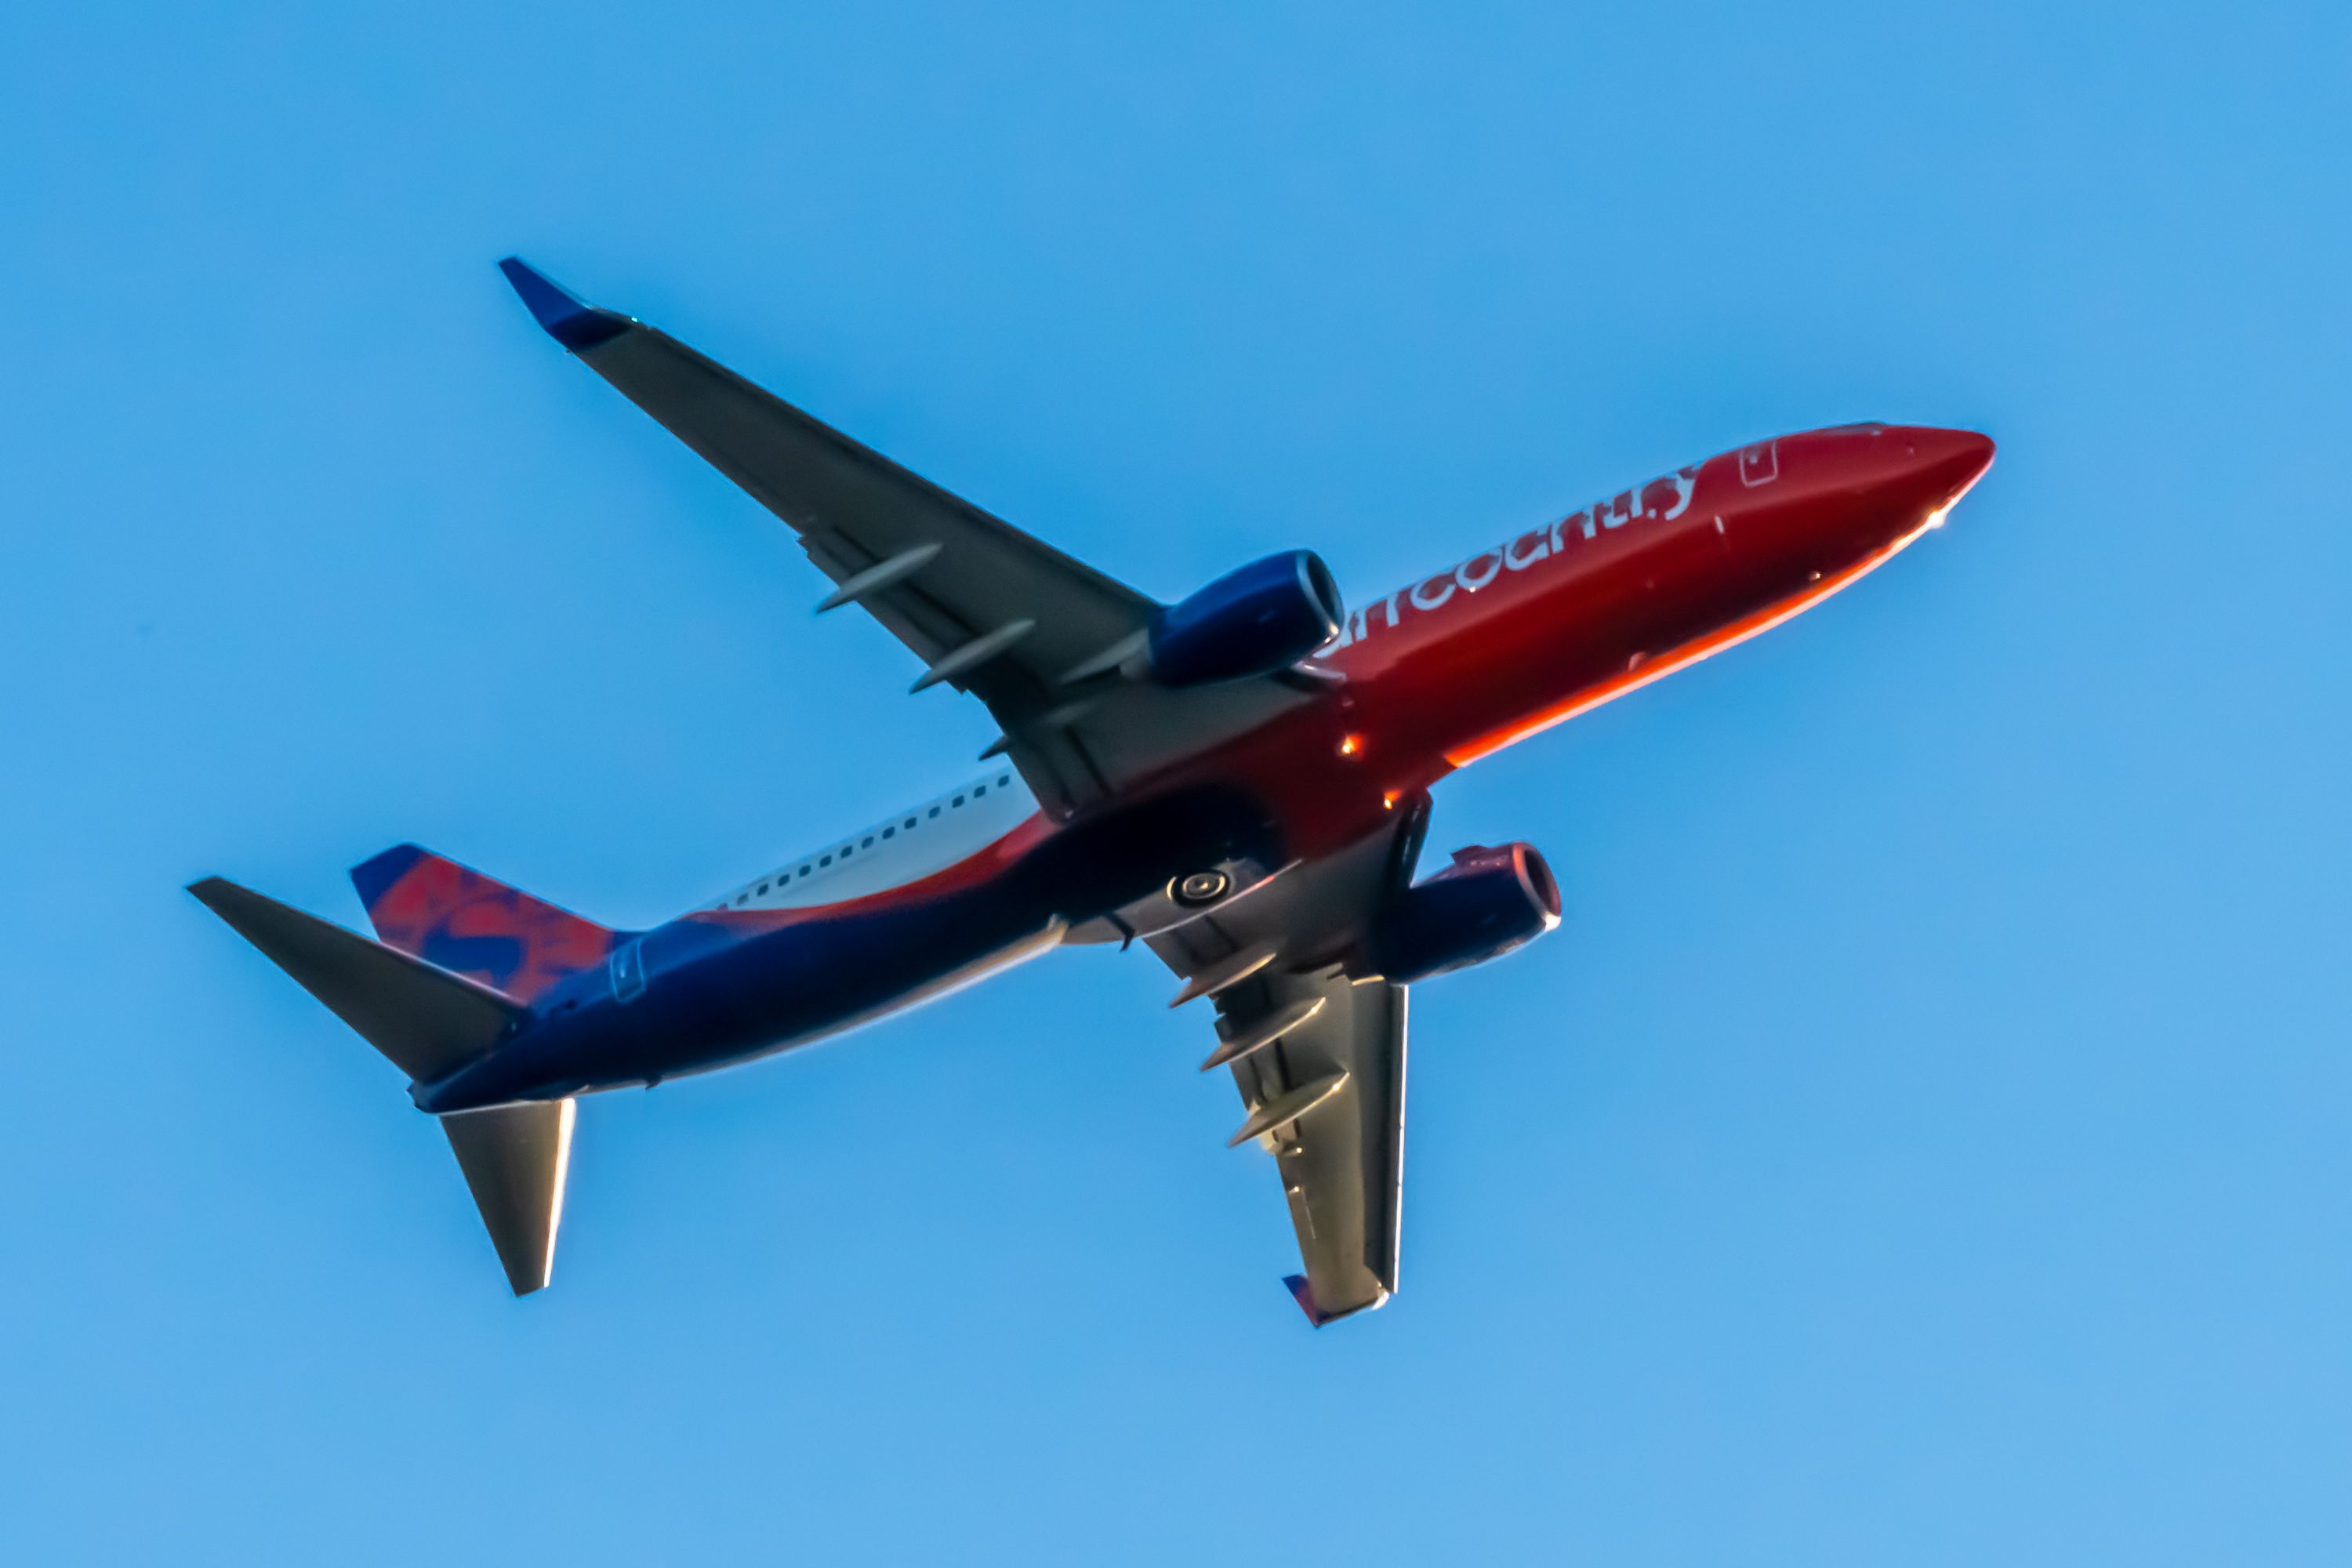 Sun Country Airlines 737-800 Rising in Low Light